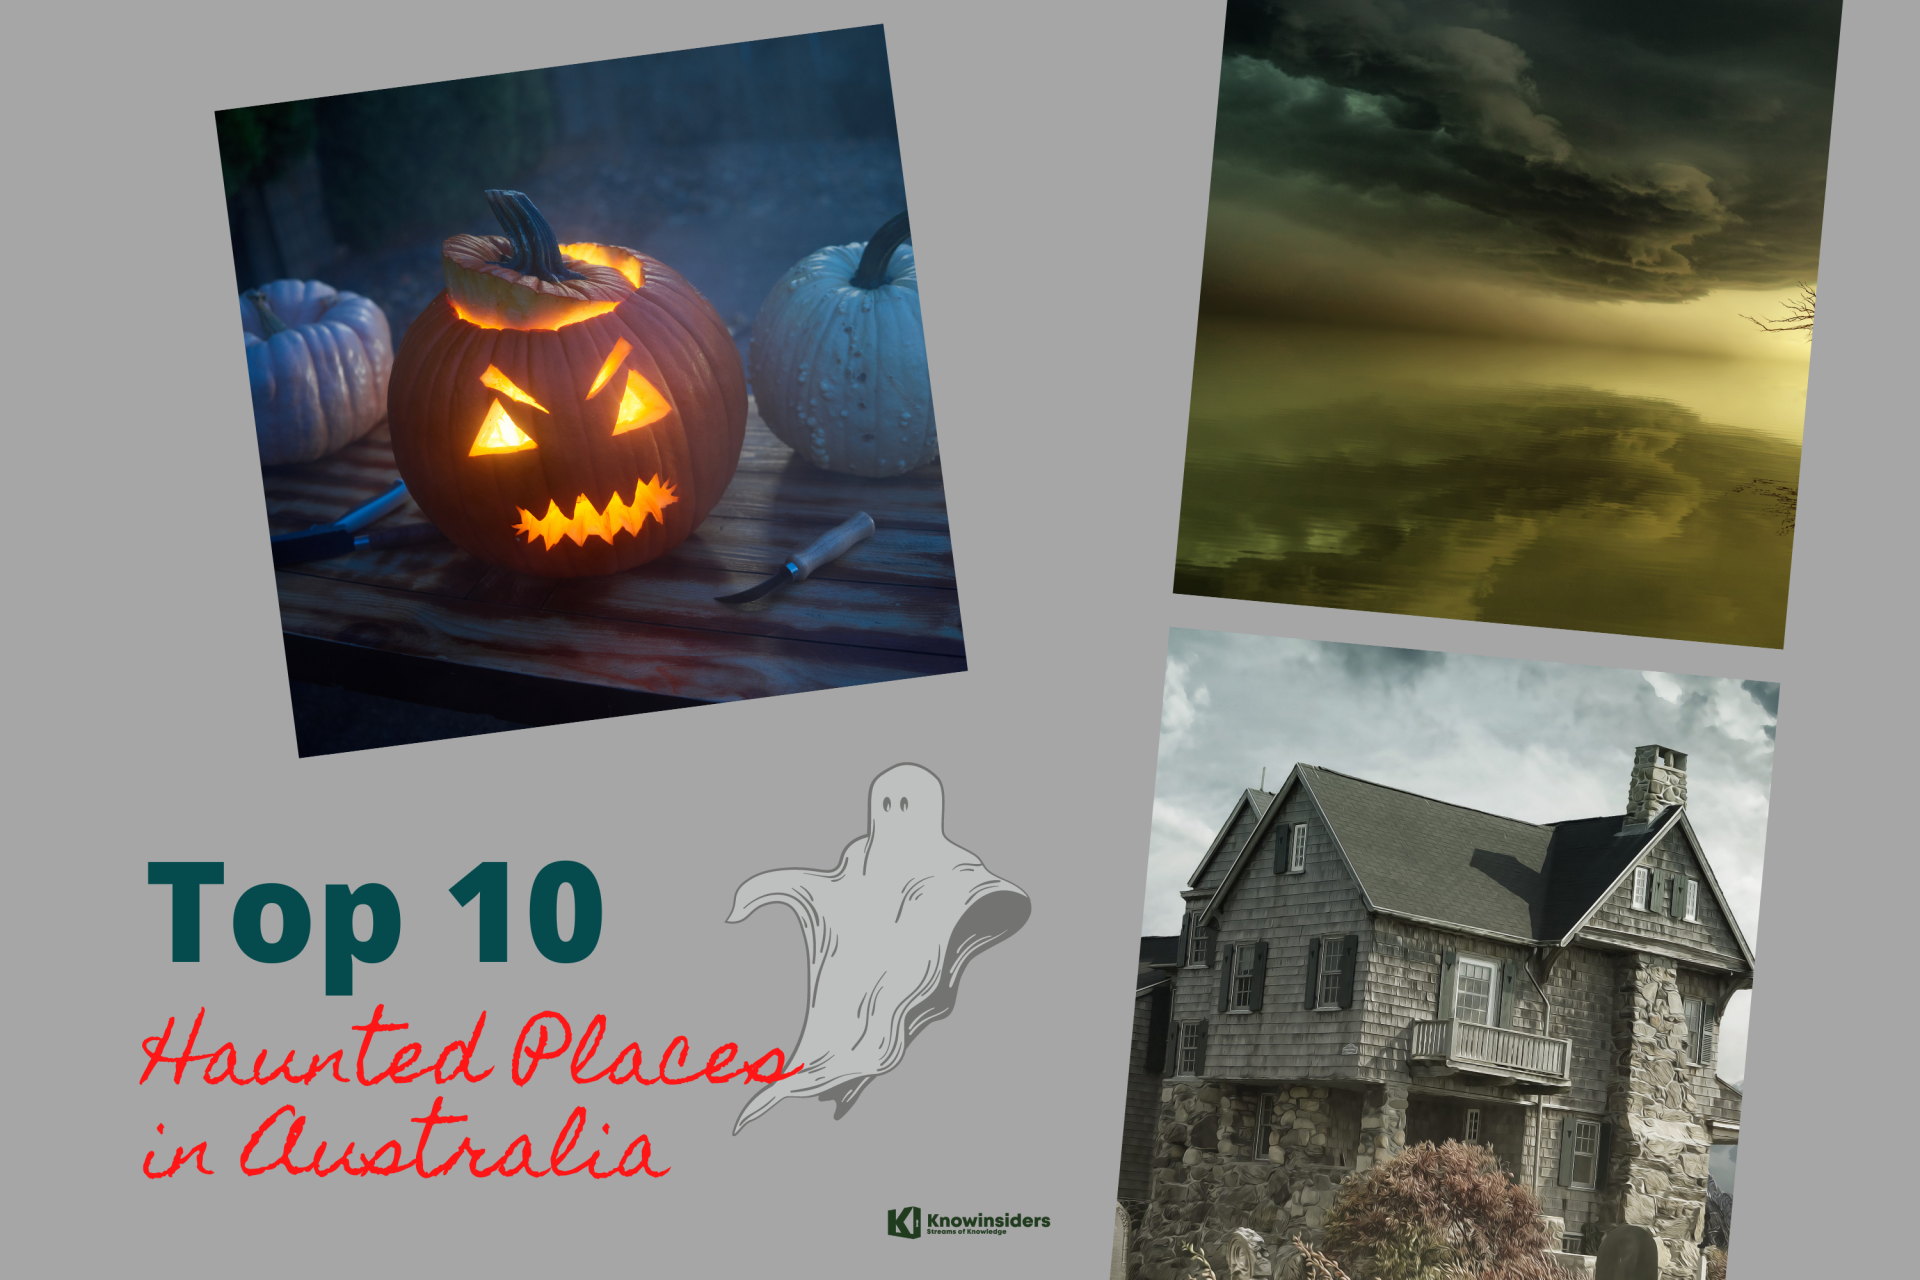 Top 10 Most Haunted Places in Australia